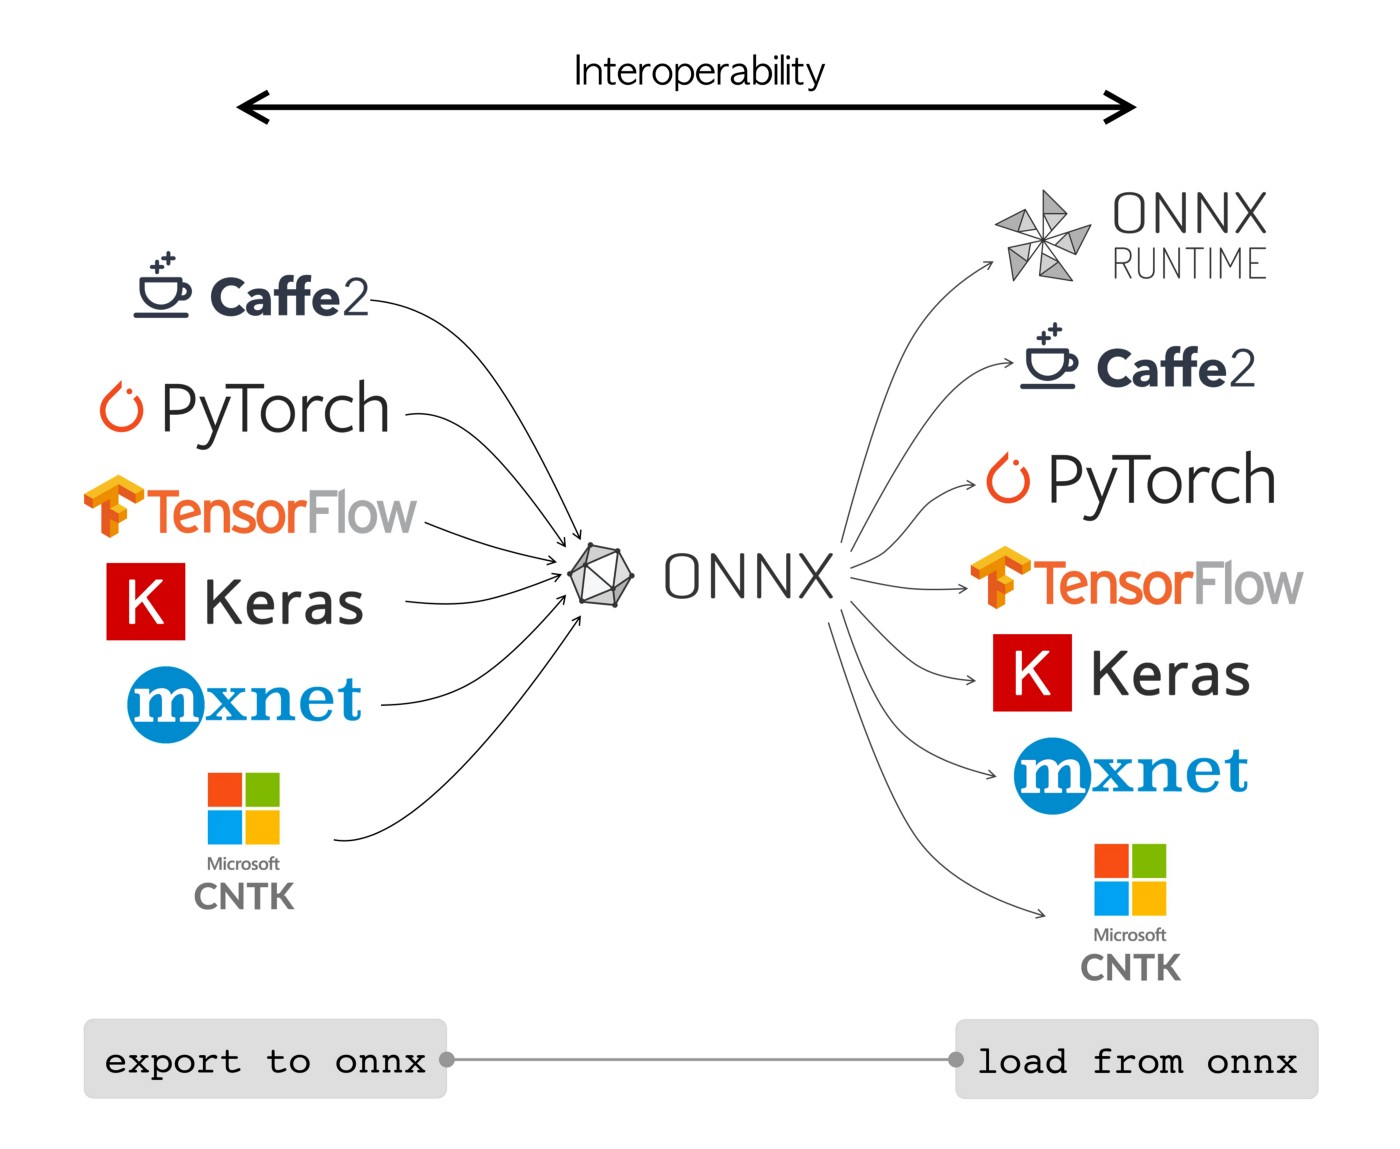 A diagram showing many ML frameworks on the left, all pointing to ONNX at the center, pointing to many ML runtimes on the right (incidentally, the runtimes are basically the same frameworks as on the left)